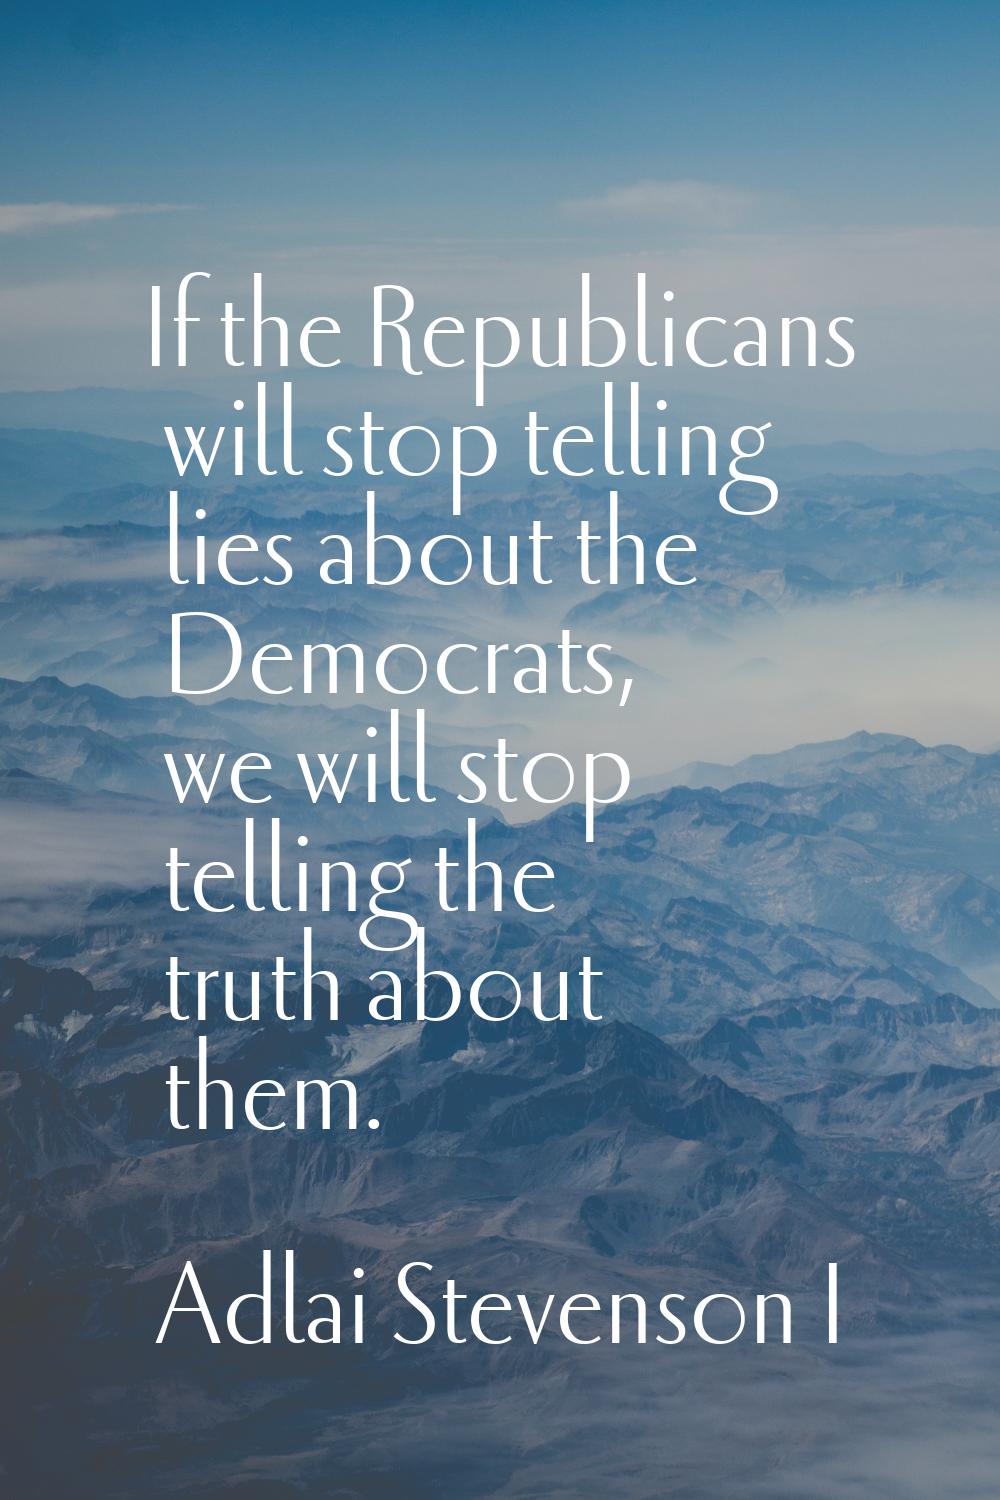 If the Republicans will stop telling lies about the Democrats, we will stop telling the truth about